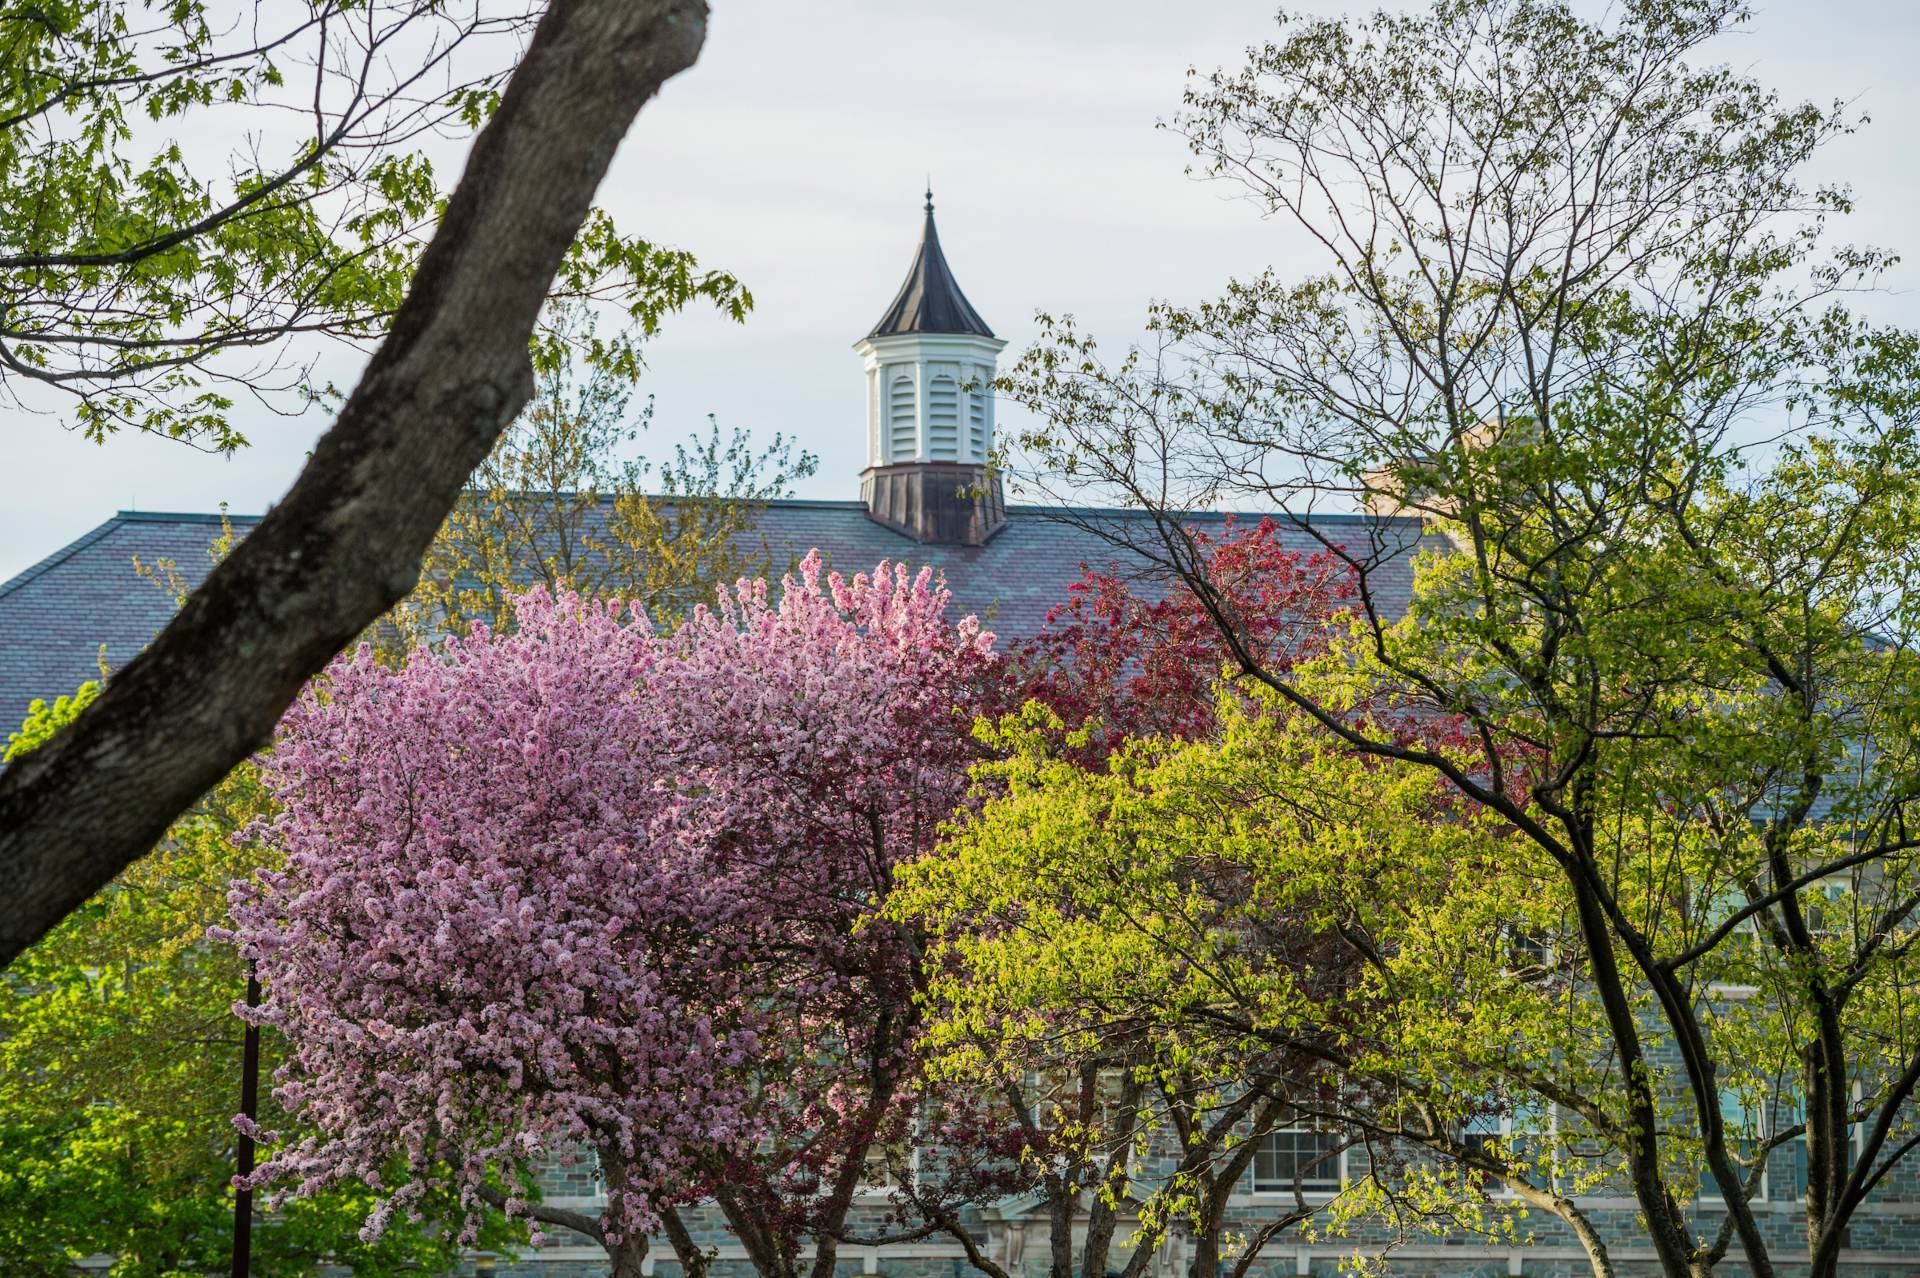 Blooming trees on campus